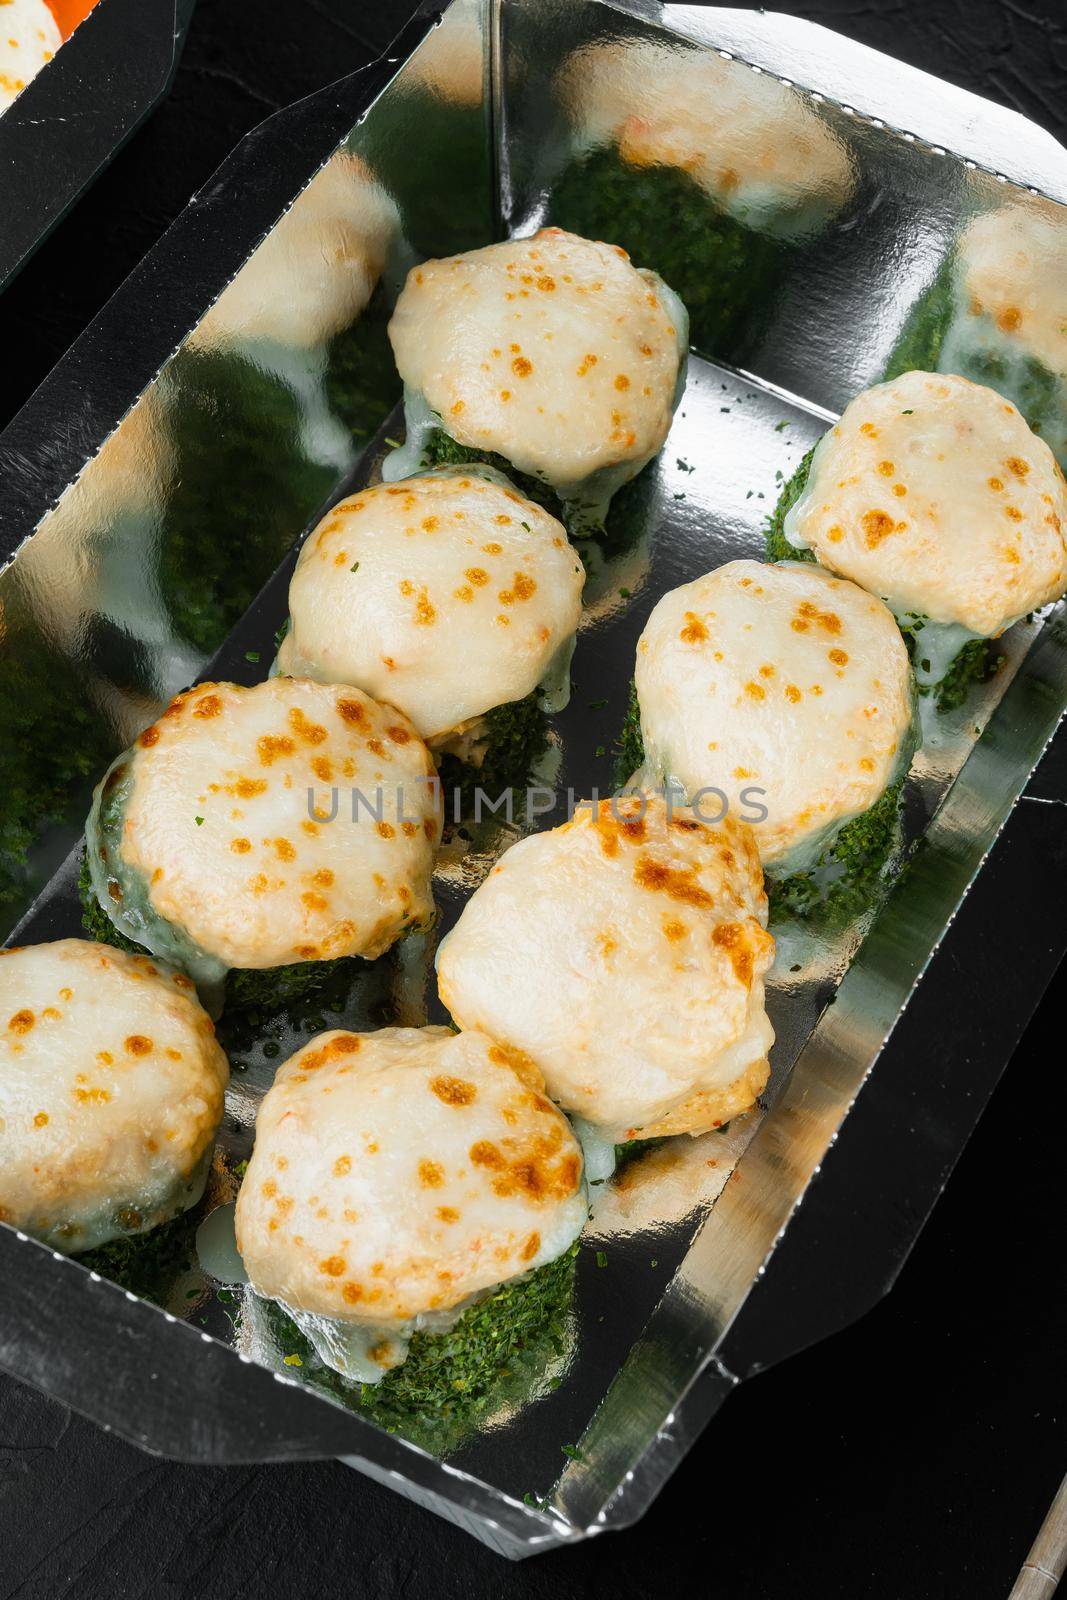 Sushi rolls in takeaway container set, on black stone background